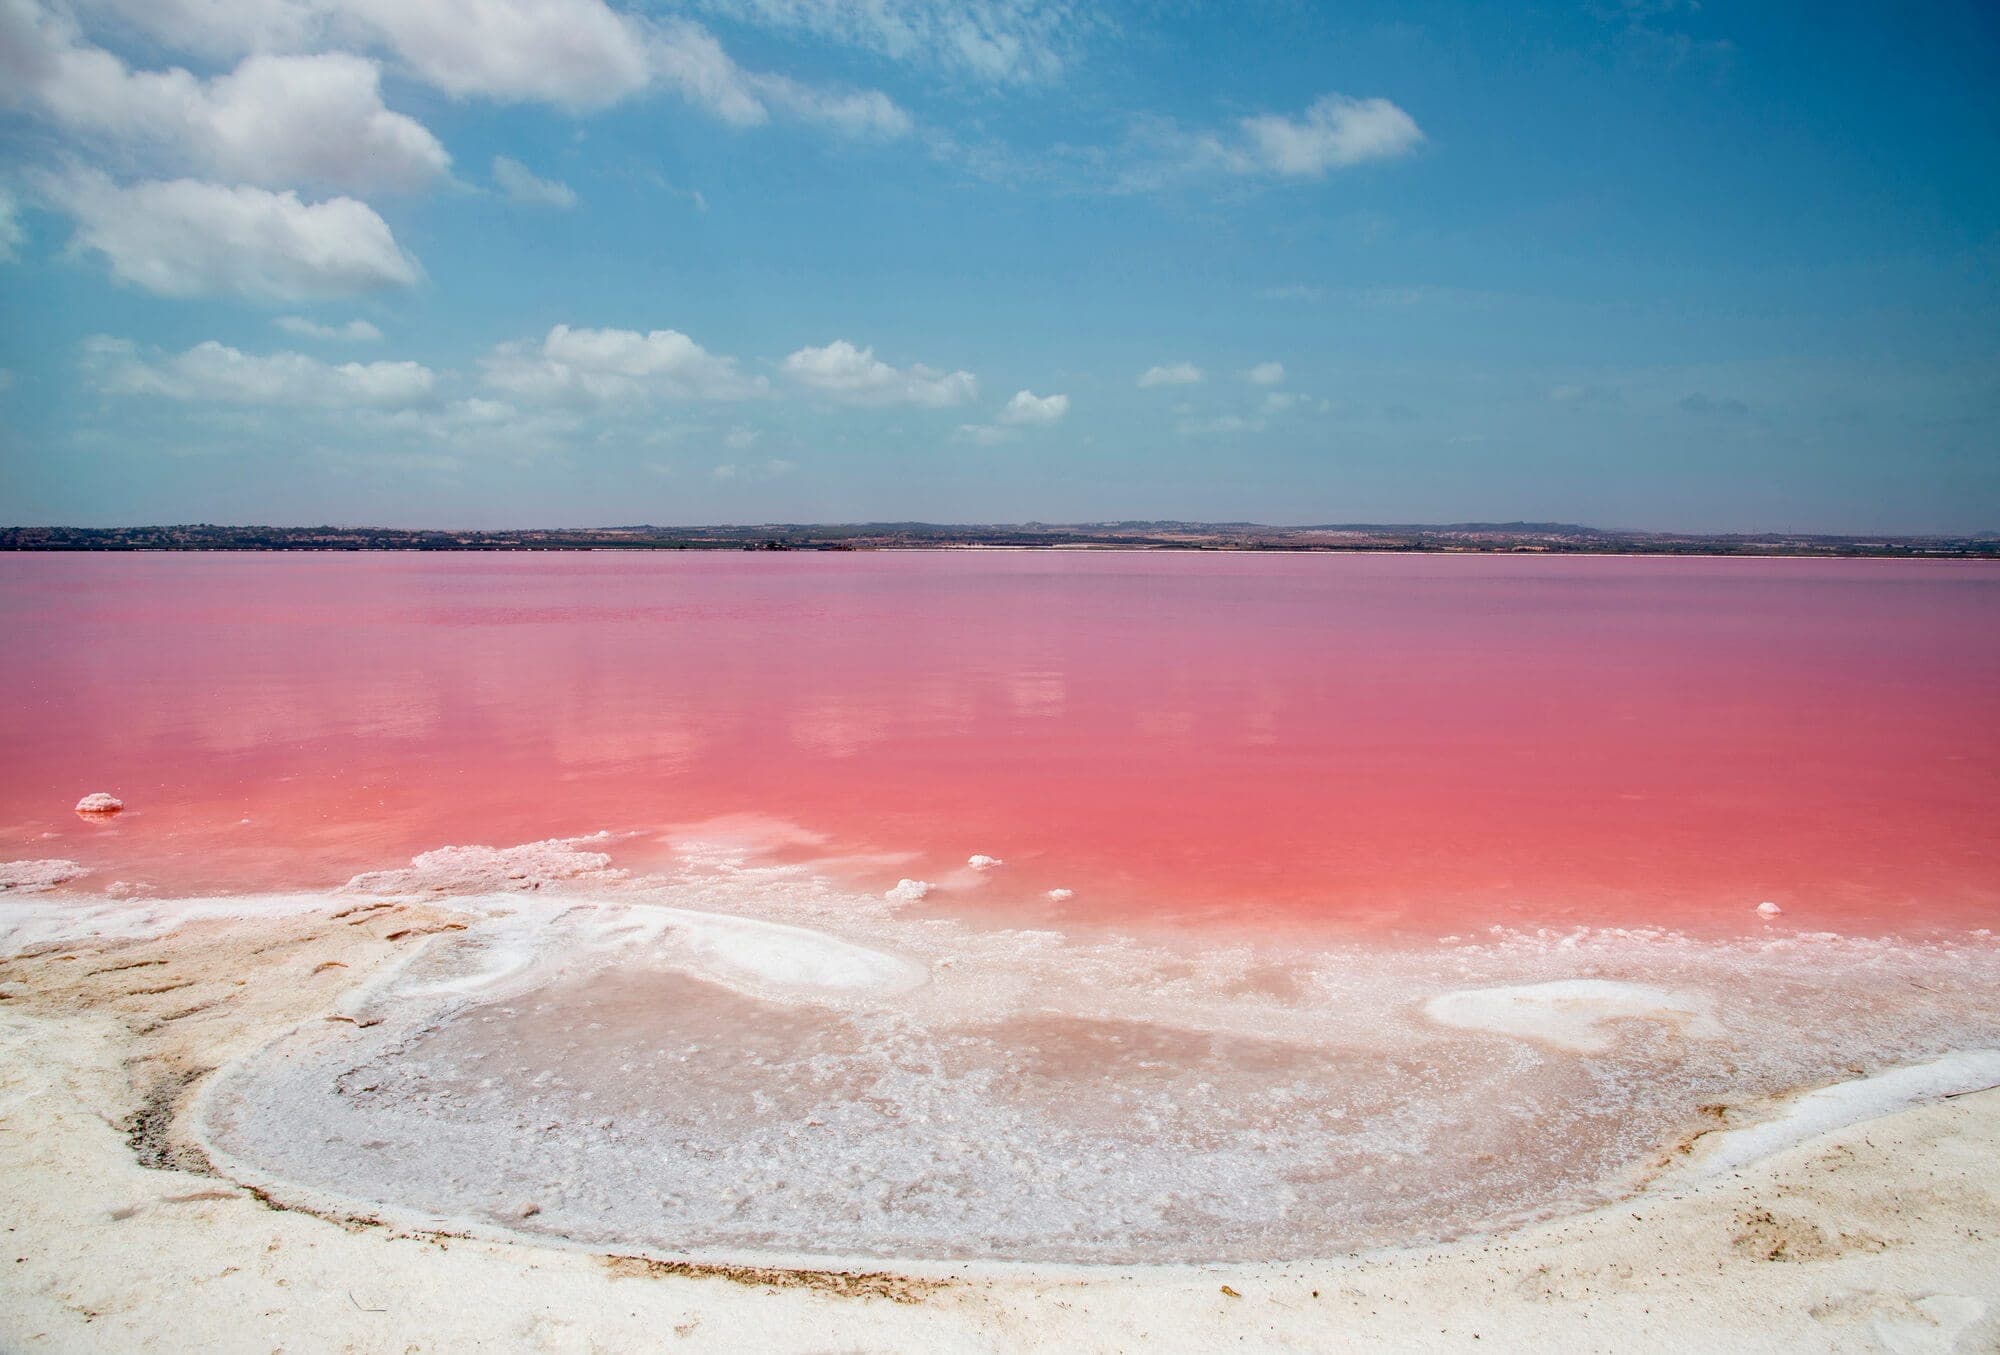 Did you know there's a pink lake in Spain? Discover Laguna Salada de Torrevieja